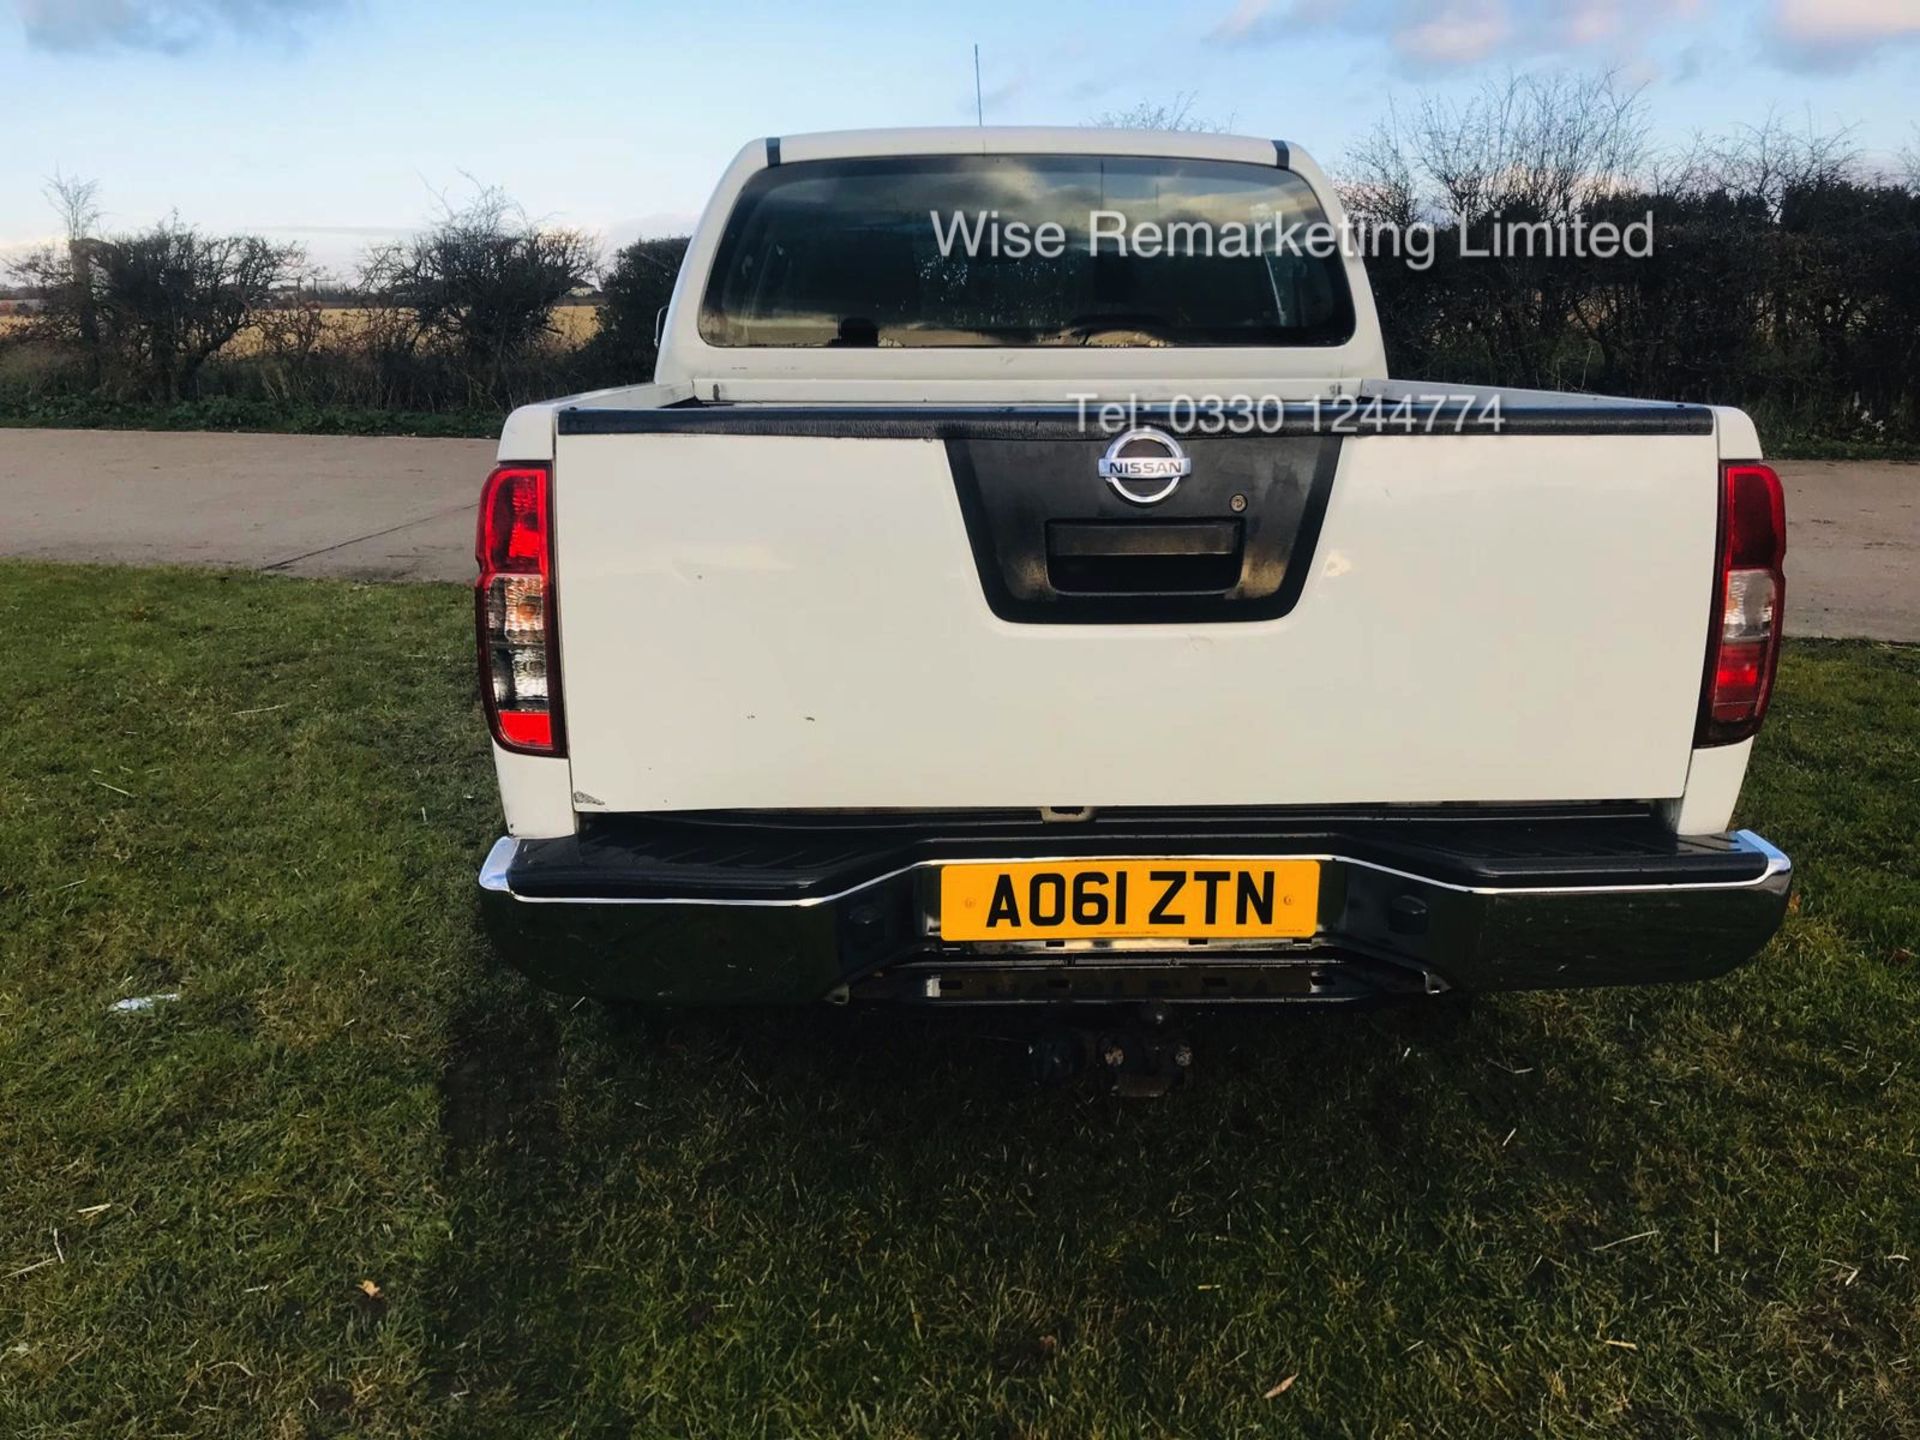 Nissan Navara Acentra 2.5 DCI - 2012 Model - Diamond White - 1 Keeper From New - Tow Bar - Image 3 of 20